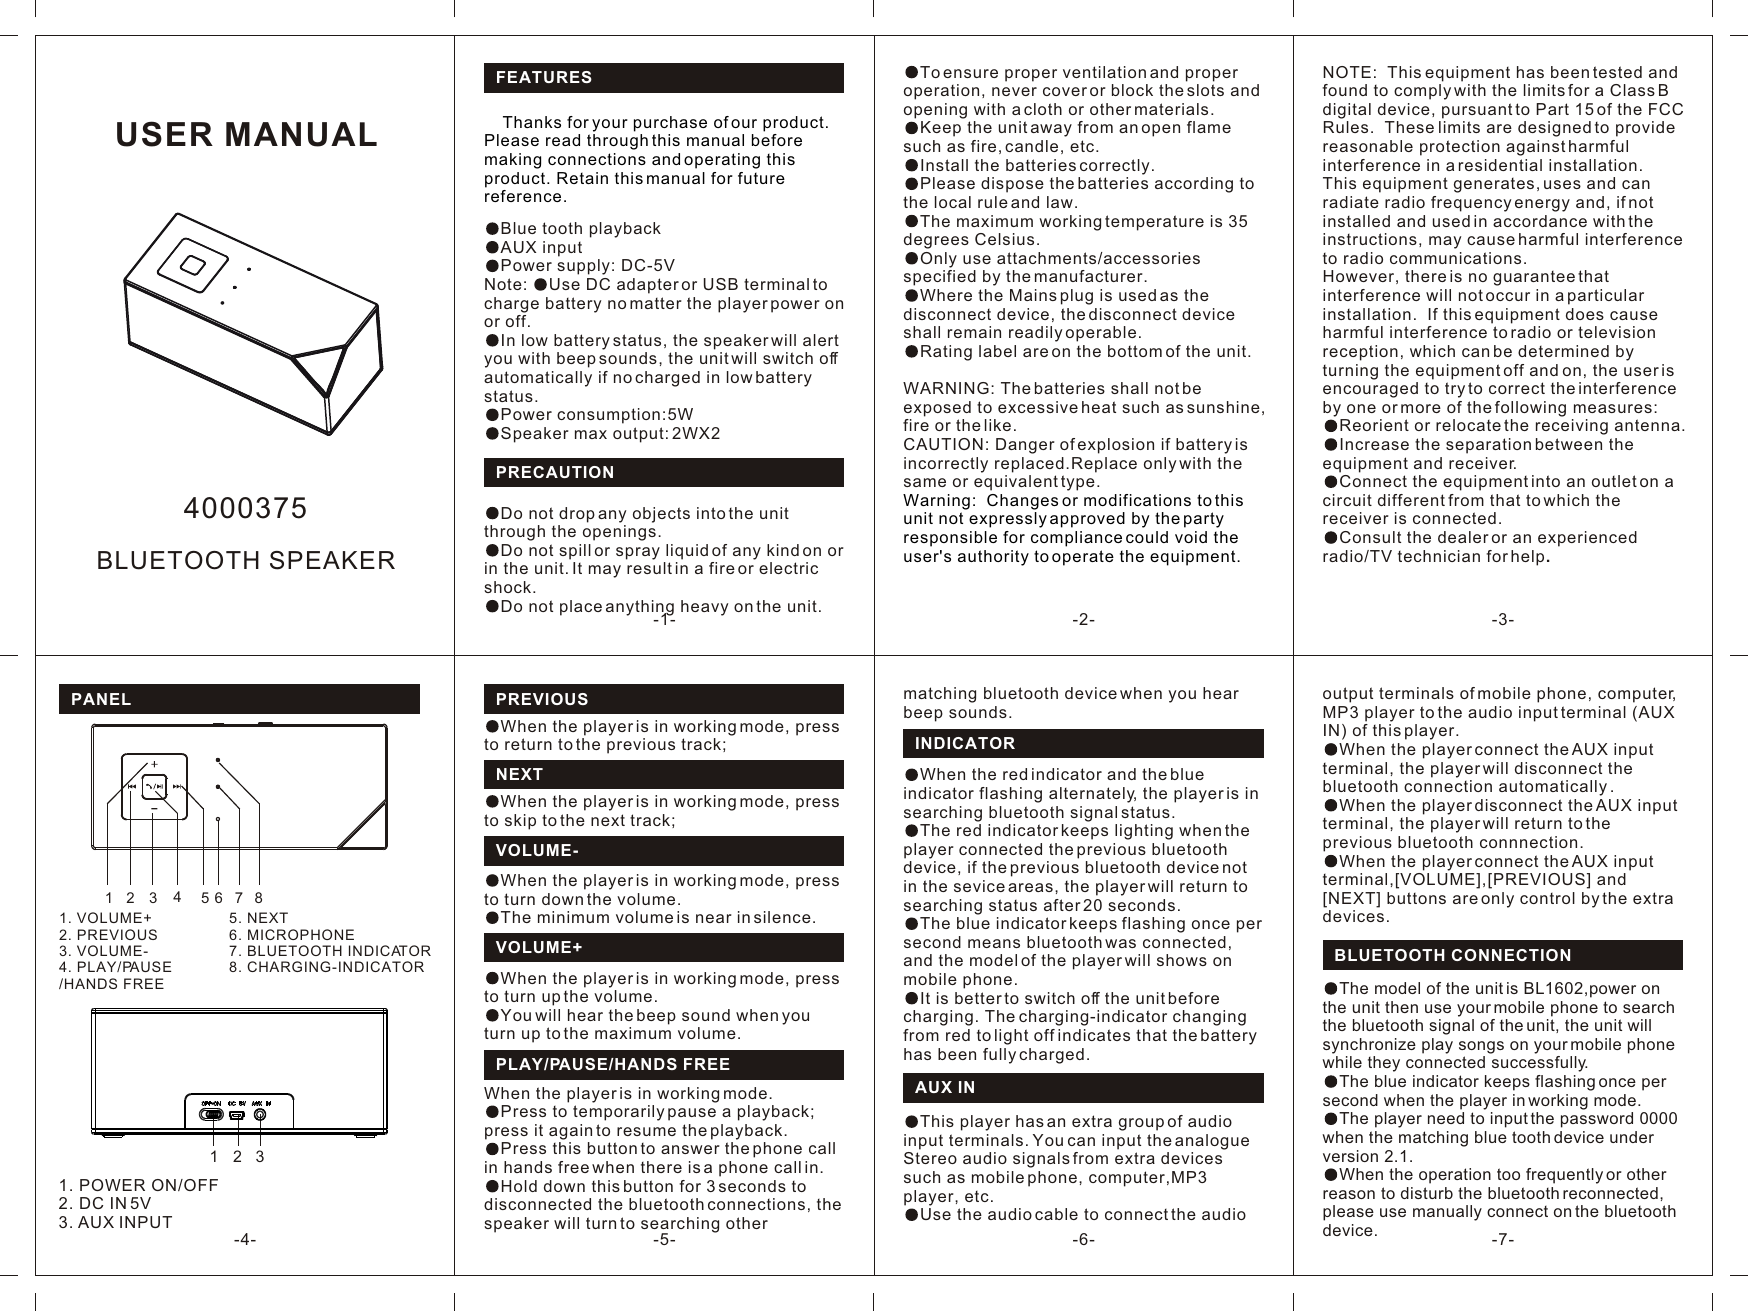 USER MANUAL-1- -2- -3--4- -7--6--5-FEATURES     Thanks for your purchase of our product. Please read through this manual before making connections and operating this product. Retain this manual for future reference.Blue tooth playbackAUX inputPower supply: DC-5VNote:  Use DC adapter or USB terminal to charge battery no matter the player power on or off.In low battery status, the speaker will alert you with beep sounds, the unit will switch off automatically if no charged in low battery status.Power consumption:5WSpeaker max output: 2WX2PREVIOUSPLAY/PAUSE/HANDS FREEWhen the player is in working mode, press to return to the previous track;When the player is in working mode.Press to temporarily pause a playback; press it again to resume the playback.Press this button to answer the phone call in hands free when there is a phone call in.Hold down this button for 3 seconds to disconnected the bluetooth connections, the speaker will turn to searching other NEXTWhen the player is in working mode, press to skip to the next track;VOLUME-When the player is in working mode, press to turn down the volume.The minimum volume is near in silence.VOLUME+When the player is in working mode, press to turn up the volume.You will hear the beep sound when you turn up to the maximum volume.output terminals of mobile phone, computer, MP3 player to the audio input terminal (AUX IN) of this player. When the player connect the AUX input terminal, the player will disconnect the bluetooth connection automatically .When the player disconnect the AUX input terminal, the player will return to the previous bluetooth connnection.When the player connect the AUX input terminal,[VOLUME],[PREVIOUS] and [NEXT] buttons are only control by the extra devices.BLUETOOTH CONNECTIONThe blue indicator keeps flashing once per second when the player in working mode.The player need to input the password 0000 when the matching blue tooth device under version 2.1.When the operation too frequently or other reason to disturb the bluetooth reconnected, please use manually connect on the bluetooth device.The model of the unit is BL1602,power on the unit then use your mobile phone to search the bluetooth signal of the unit, the unit will synchronize play songs on your mobile phone while they connected successfully.Do not drop any objects into the unit through the openings. Do not spill or spray liquid of any kind on or in the unit. It may result in a fire or electric shock. Do not place anything heavy on the unit. PRECAUTIONTo ensure proper ventilation and proper operation, never cover or block the slots and opening with a cloth or other materials. Keep the unit away from an open flame such as fire, candle, etc. Install the batteries correctly. Please dispose the batteries according to the local rule and law. The maximum working temperature is 35 degrees Celsius.Only use attachments/accessories specified by the manufacturer.Where the Mains plug is used as the disconnect device, the disconnect device shall remain readily operable.Rating label are on the bottom of the unit.WARNING: The batteries shall not be exposed to excessive heat such as sunshine, fire or the like.CAUTION: Danger of explosion if battery is incorrectly replaced.Replace only with the same or equivalent type.Warning:  Changes or modifications to this unit not expressly approved by the party responsible for compliance could void the user&apos;s authority to operate the equipment.BLUETOOTH SPEAKER4000375PANEL13451231. VOLUME+2. PREVIOUS3. VOLUME-4. PLAY/PAUSE/HANDS FREE1. POWER ON/OFF2. DC IN 5V3. AUX INPUT27685. NEXT6. MICROPHONE7. BLUETOOTH INDICATOR8. CHARGING-INDICATORNOTE:  This equipment has been tested and found to comply with the limits for a Class B digital device, pursuant to Part 15 of the FCC Rules.  These limits are designed to provide reasonable protection against harmful interference in a residential installation.  This equipment generates, uses and can radiate radio frequency energy and, if not installed and used in accordance with the instructions, may cause harmful interference to radio communications.However, there is no guarantee that interference will not occur in a particular installation.  If this equipment does cause harmful interference to radio or television reception, which can be determined by turning the equipment off and on, the user is encouraged to try to correct the interference by one or more of the following measures:Reorient or relocate the receiving antenna.Increase the separation between the equipment and receiver.Connect the equipment into an outlet on a circuit different from that to which the        receiver is connected.Consult the dealer or an experienced radio/TV technician for help.INDICATOR When the red indicator and the blue indicator flashing alternately, the player is in searching bluetooth signal status. The red indicator keeps lighting when the player connected the previous bluetooth device, if the previous bluetooth device not in the sevice areas, the player will return to searching status after 20 seconds.The blue indicator keeps flashing once per second means bluetooth was connected, and the model of the player will shows on mobile phone.It is better to switch off the unit before charging. The charging-indicator changing from red to light off indicates that the battery has been fully charged.AUX INmatching bluetooth device when you hear beep sounds.This player has an extra group of audio input terminals. You can input the analogue Stereo audio signals from extra devices such as mobile phone, computer,MP3 player, etc.Use the audio cable to connect the audio 